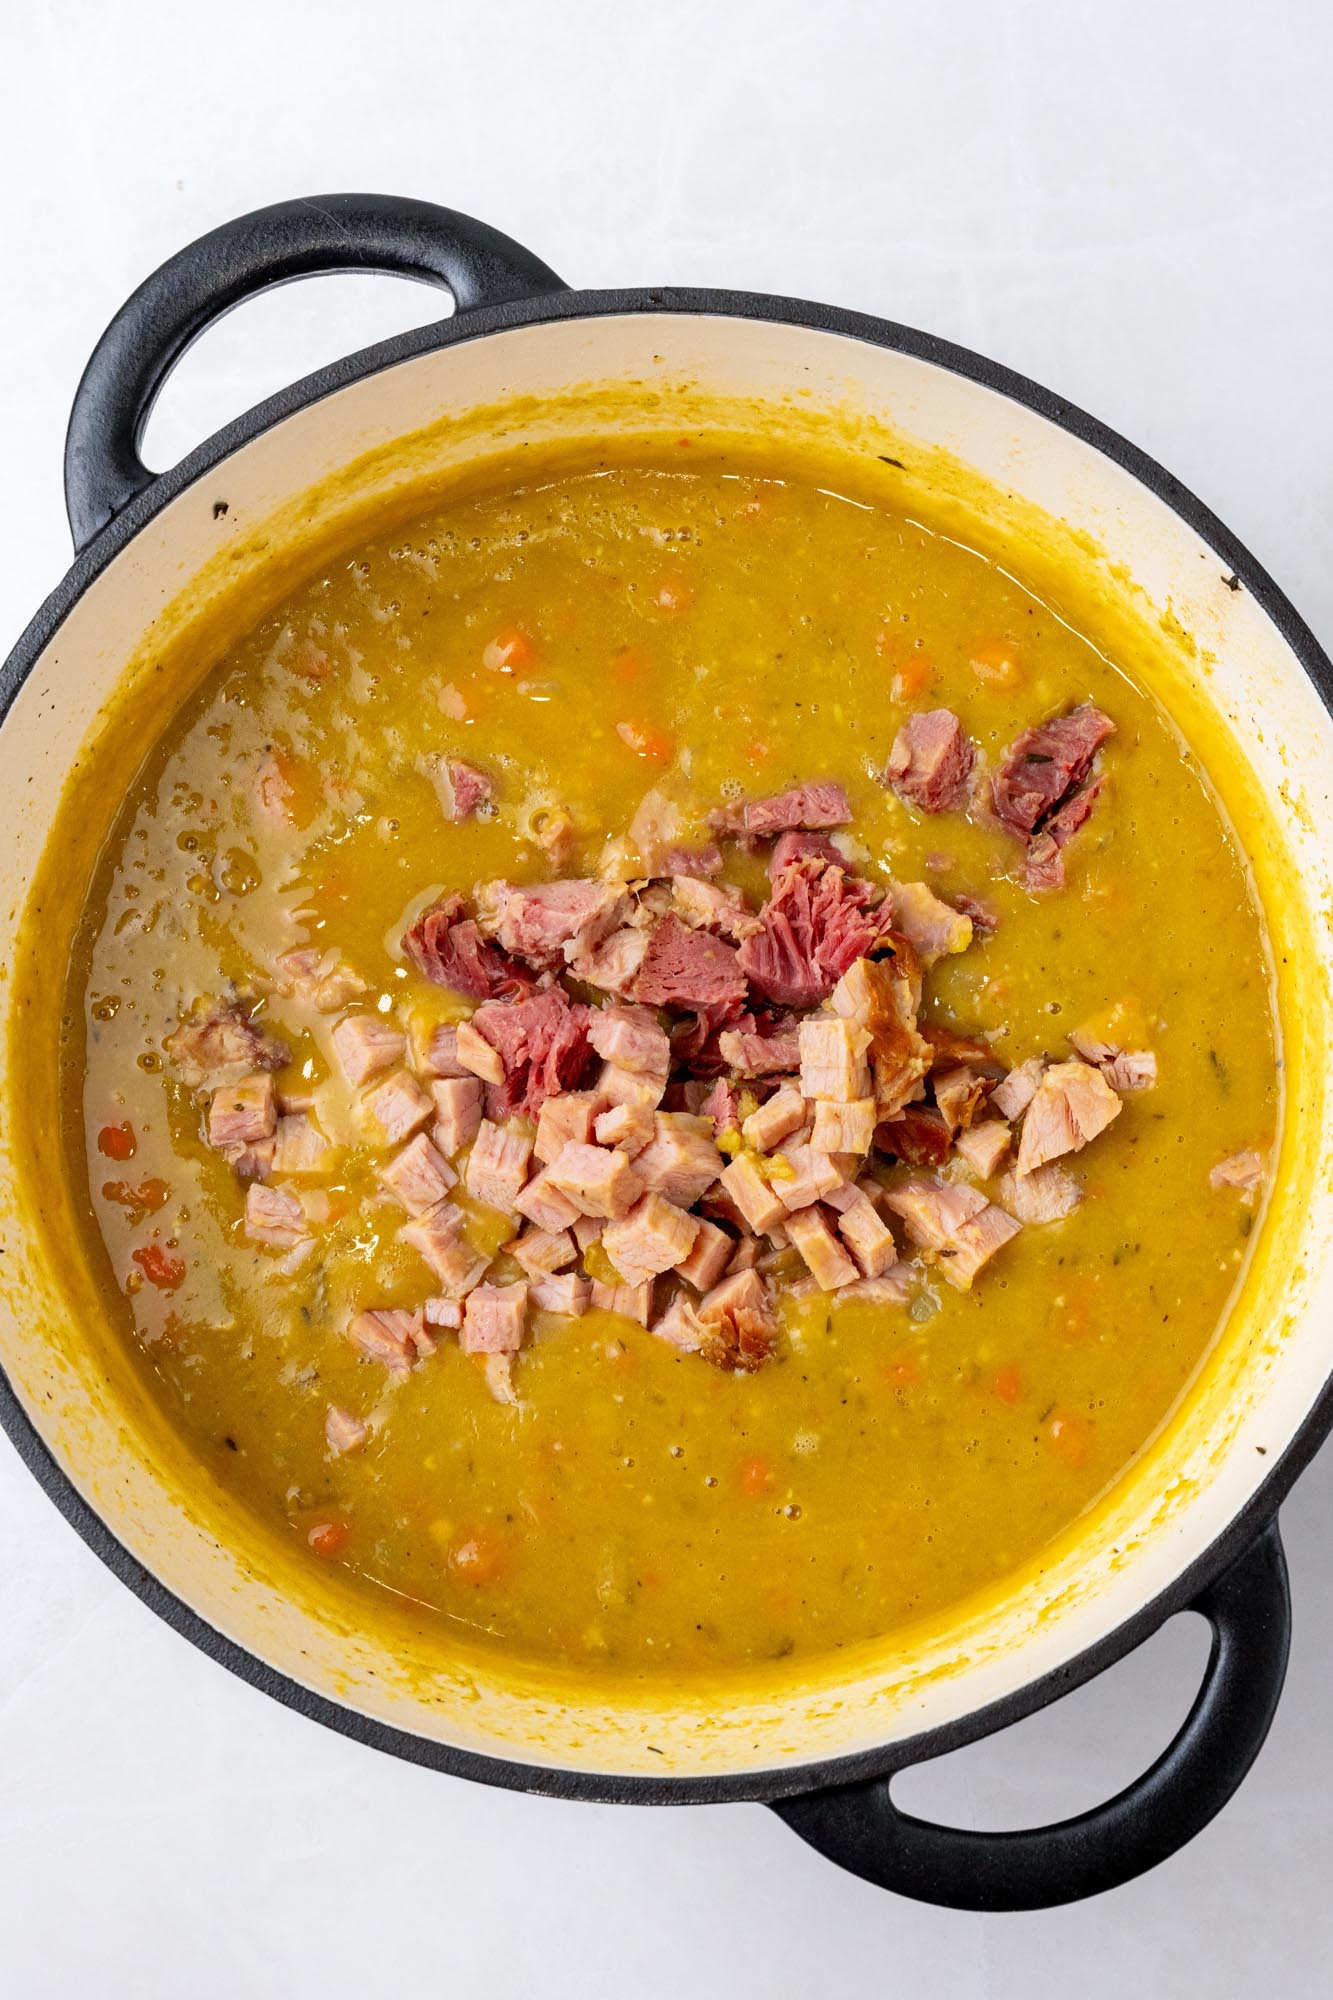 diced ham added to split pea soup in a large pot, viewed from above.